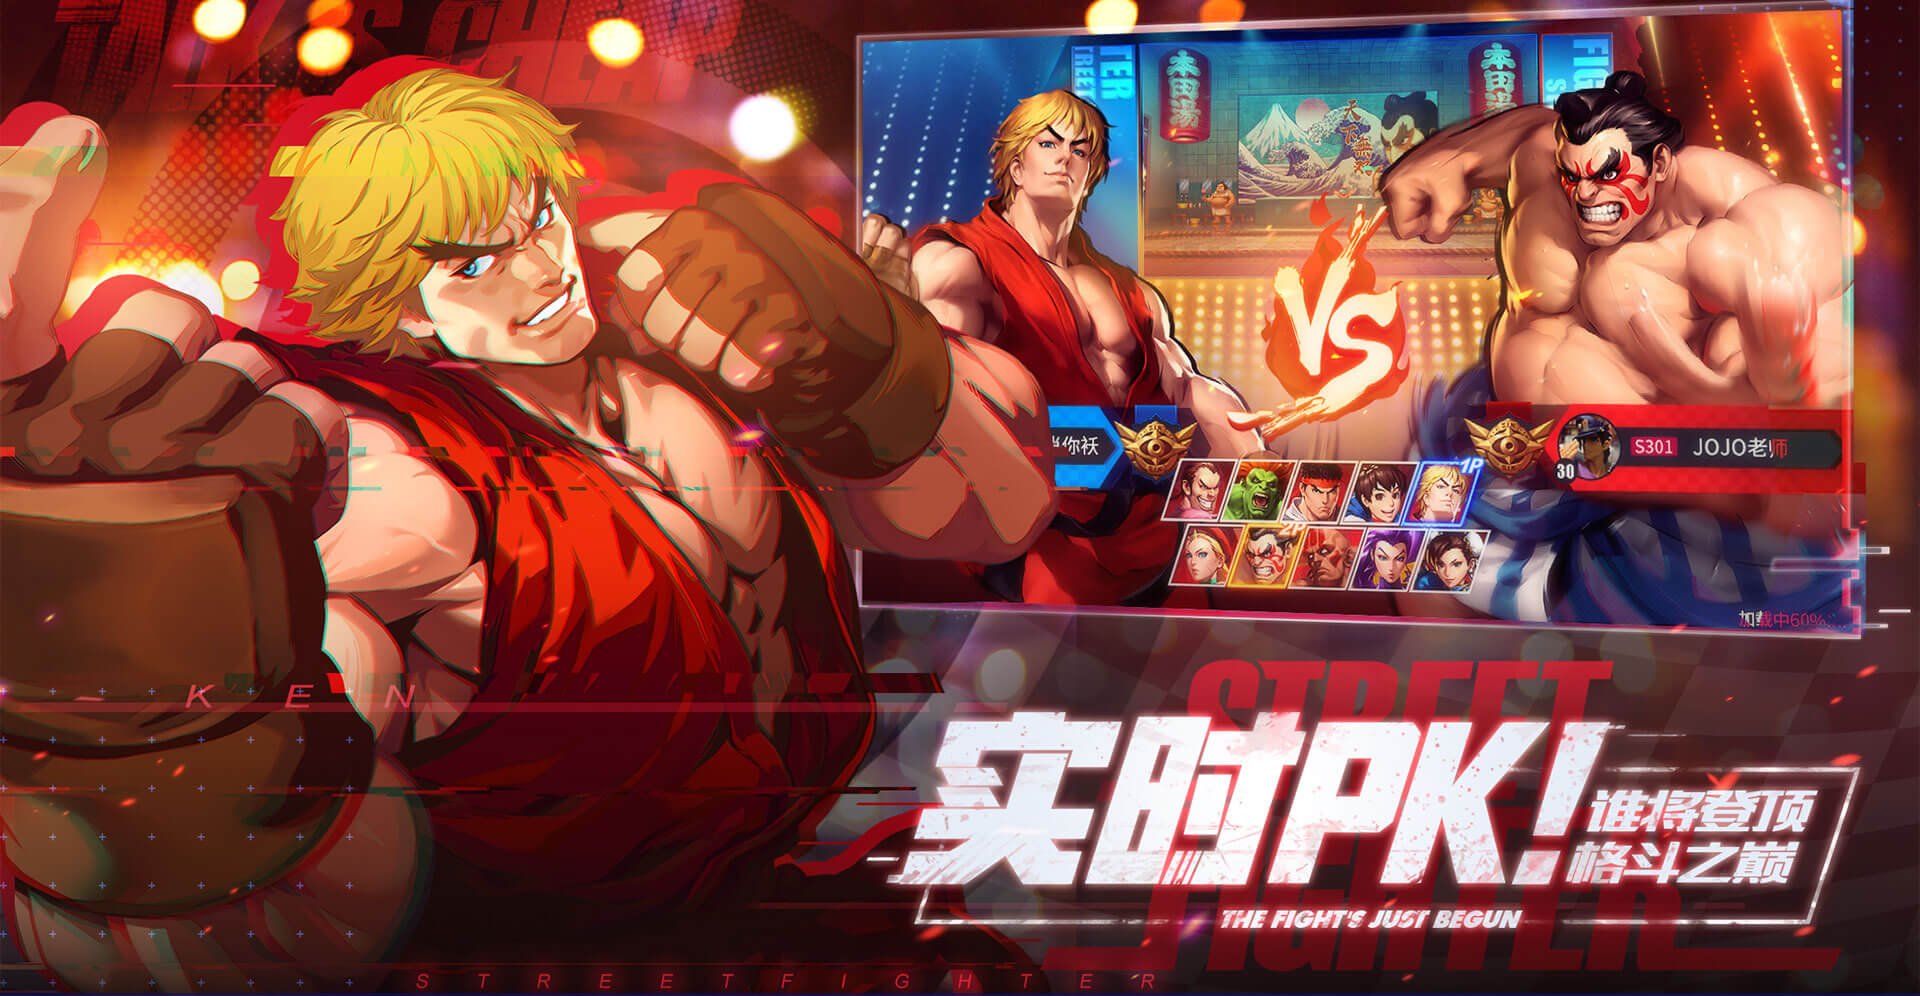 Street Fighter: Duel - Tencent Games launches new mobile title